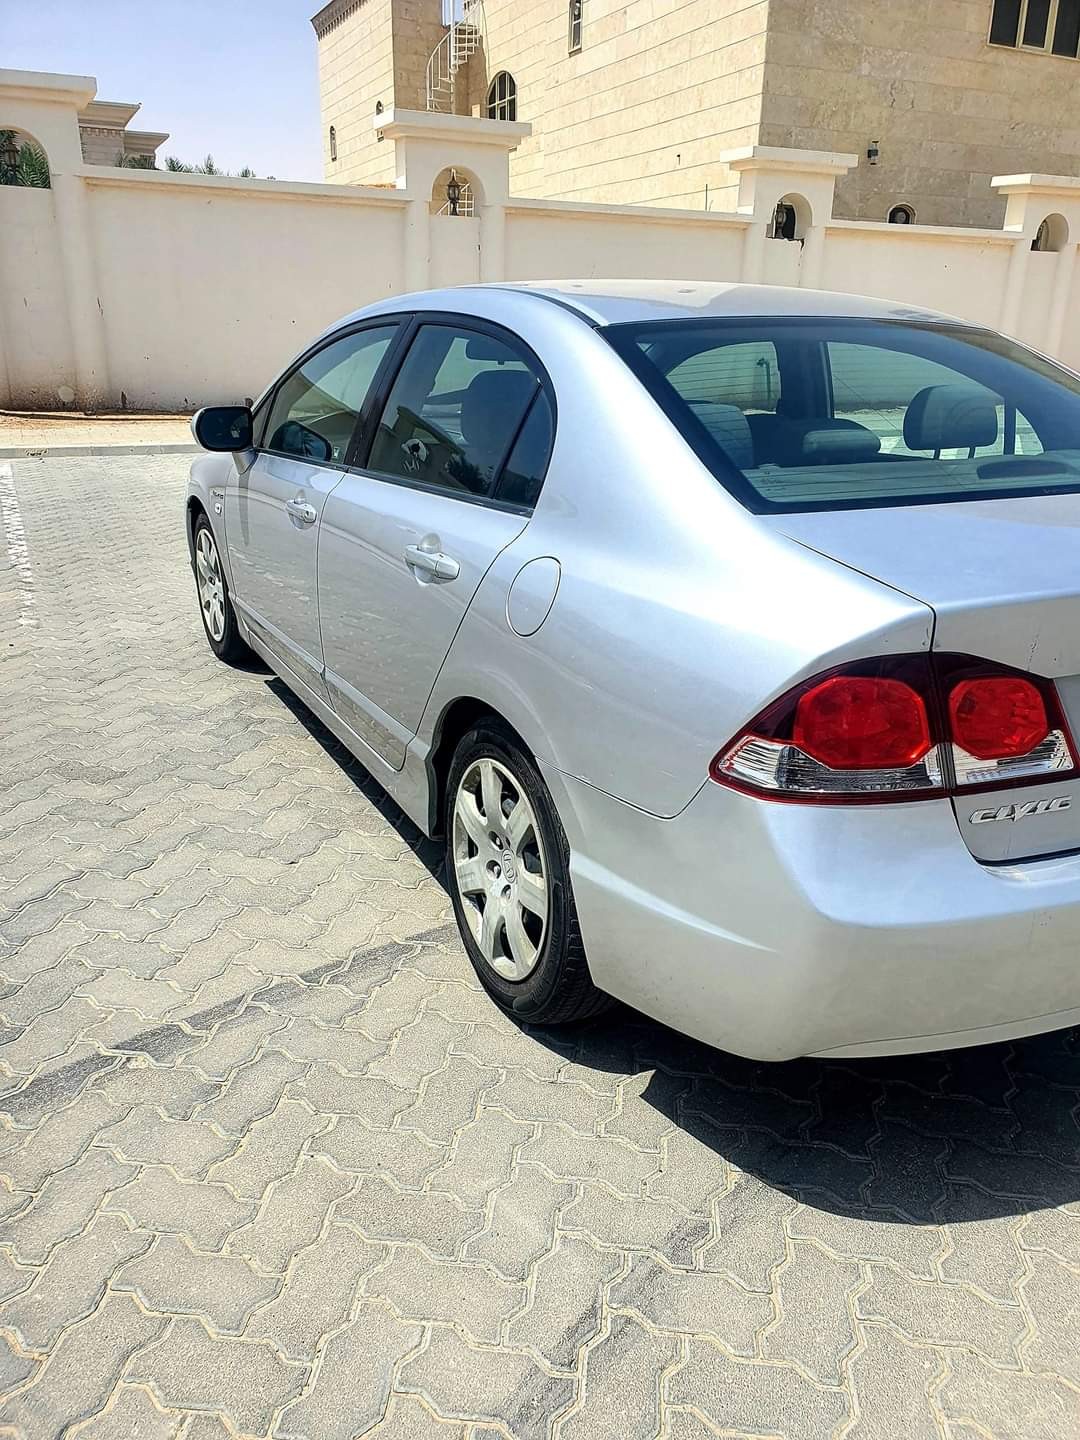 Well-Maintained 2009 Honda Civic Offered for 8,000 Dirhams